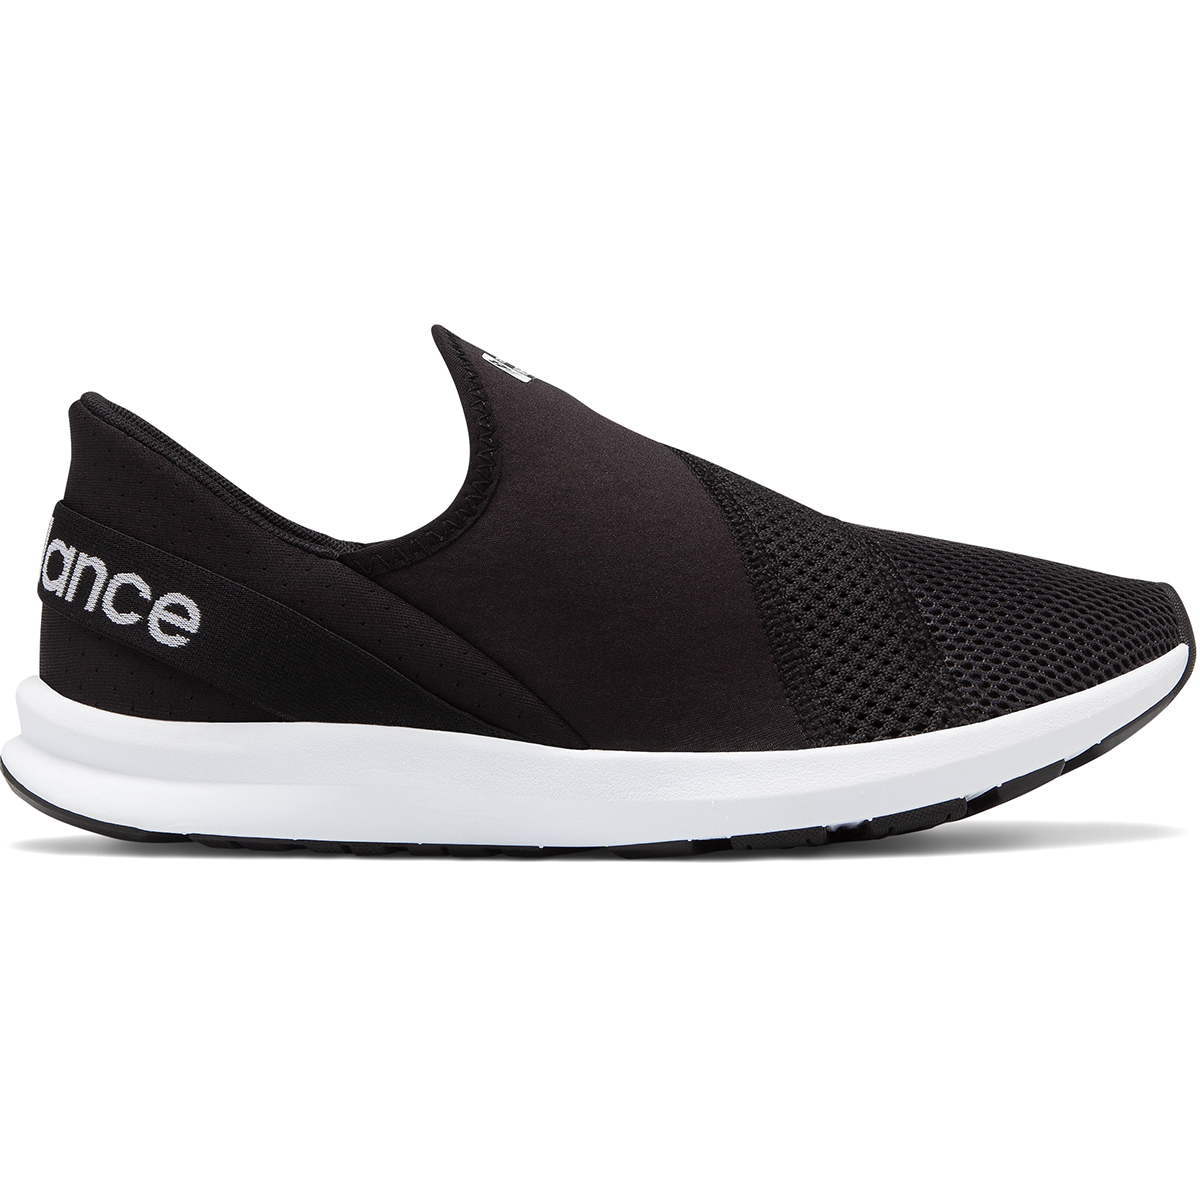 New Balance Women's Fuelcore Nergize Easy Slip-On Shoes - Black, 8